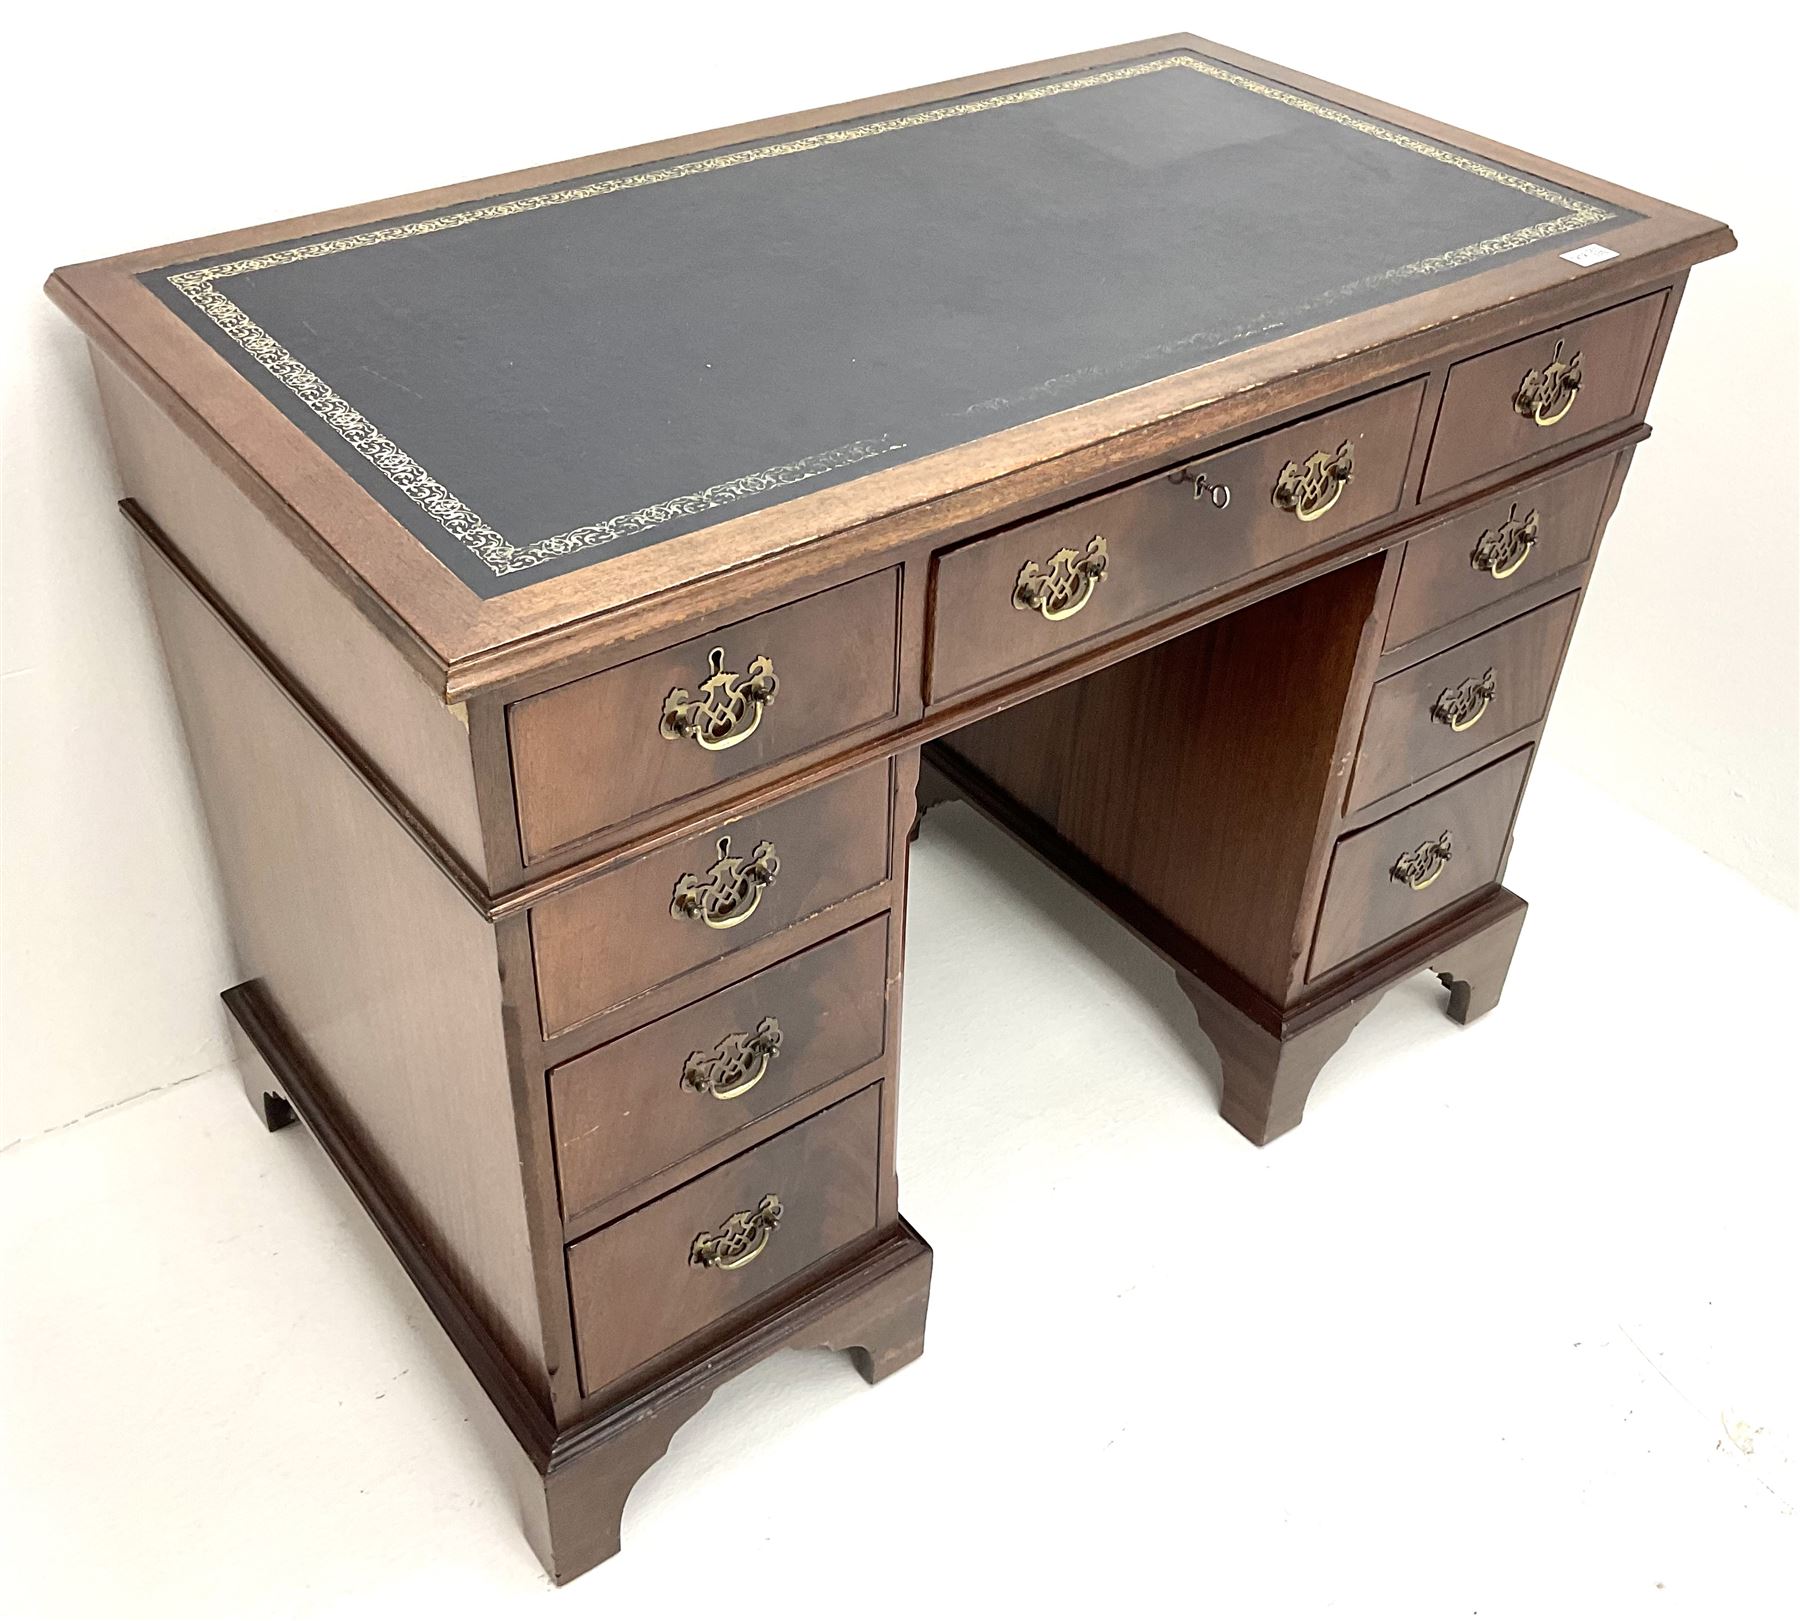 Early 20th century mahogany twin pedestal desk - Image 2 of 3